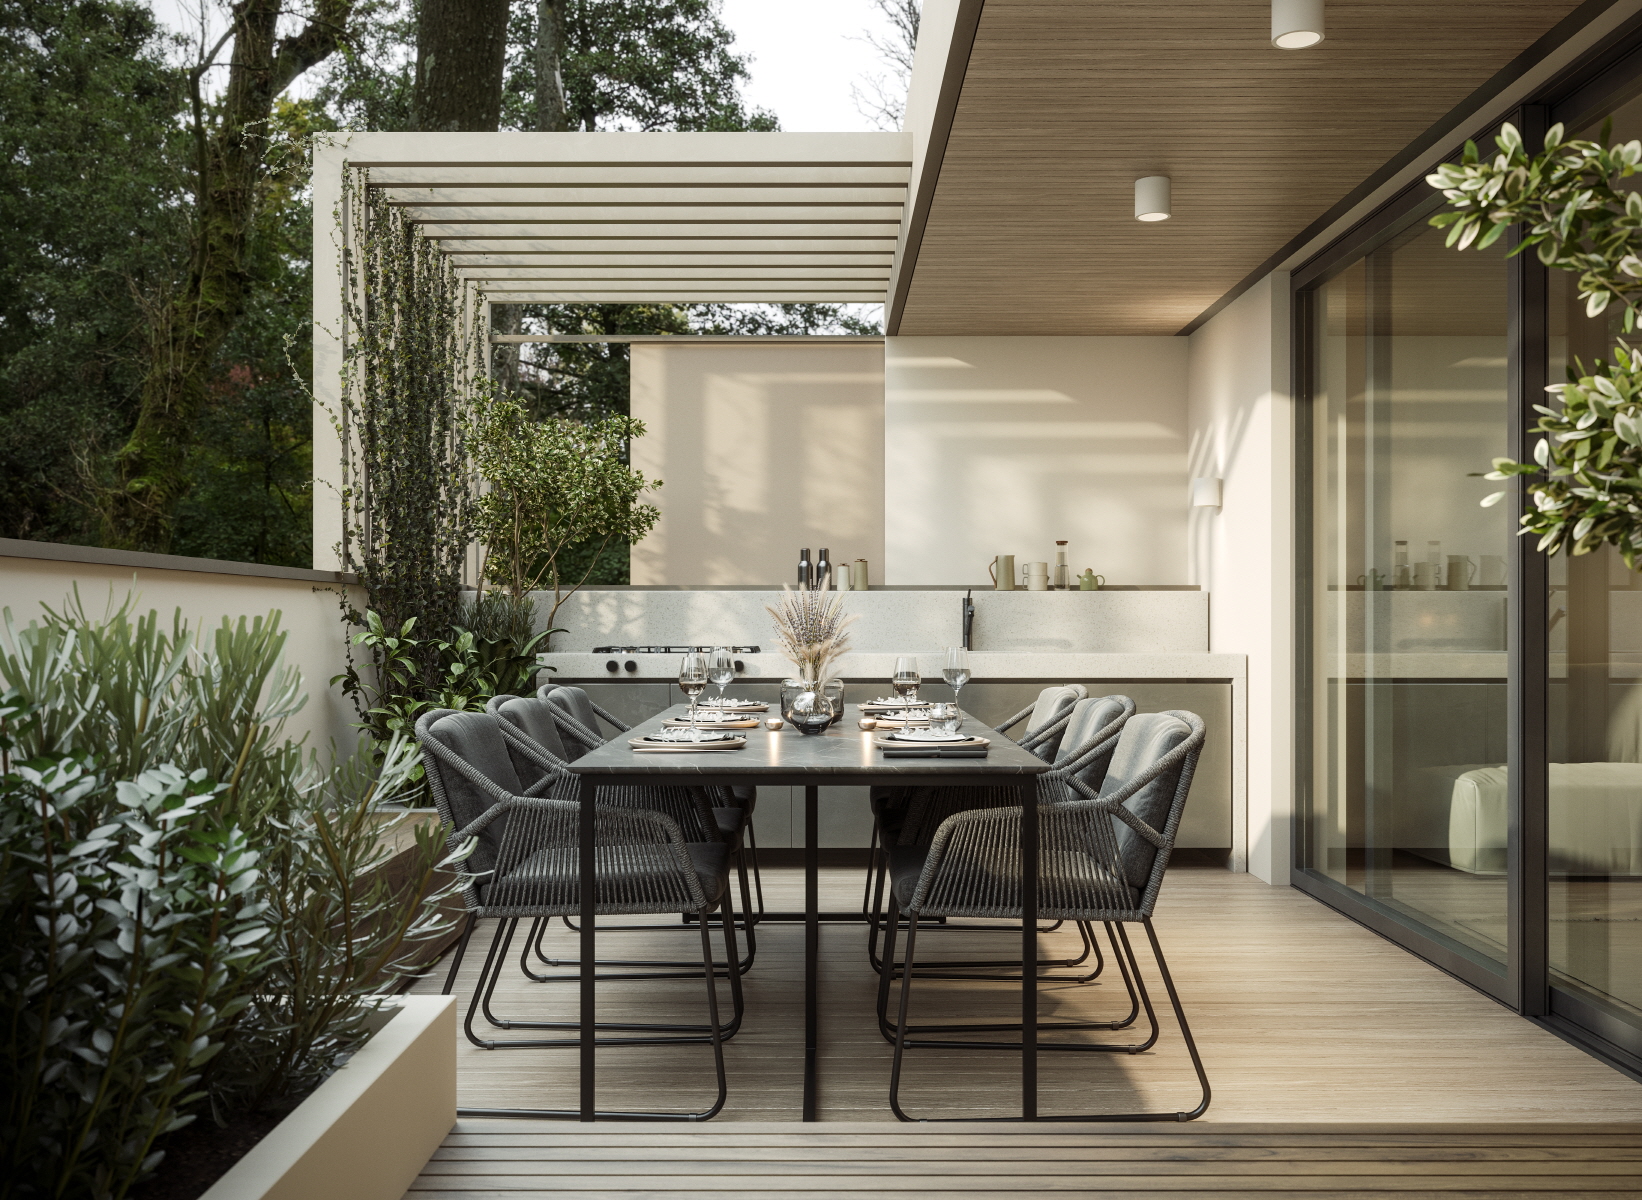 The U-shaped layout is suitable for outdoor entertaining, allowing lively interaction between the chef and guests.